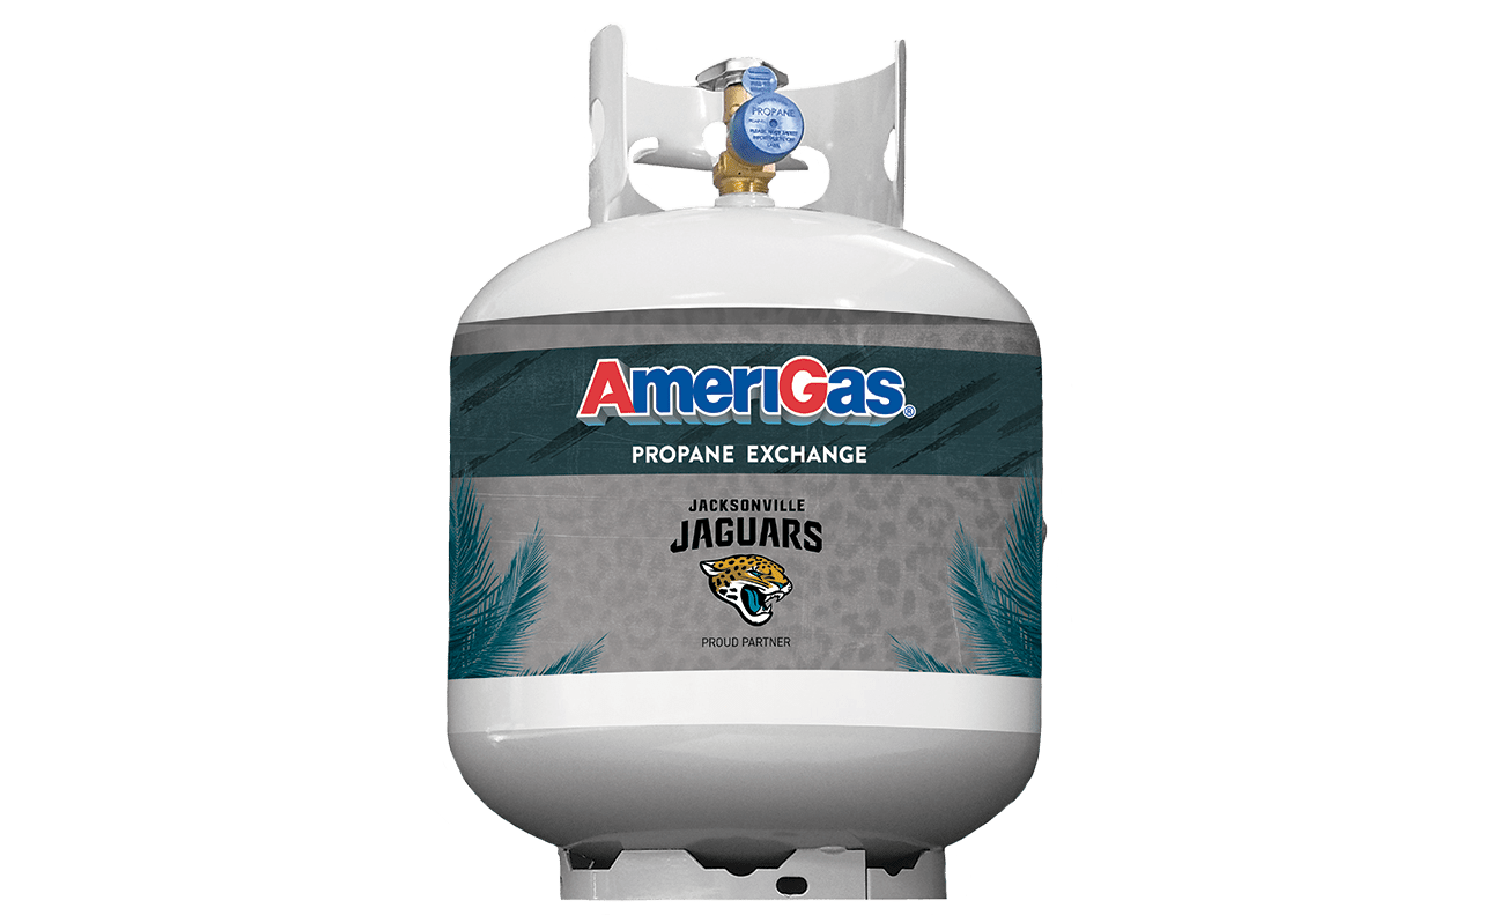 Tailgate in style with our Jaguars-sleeved AmeriGas grill tank cylinders